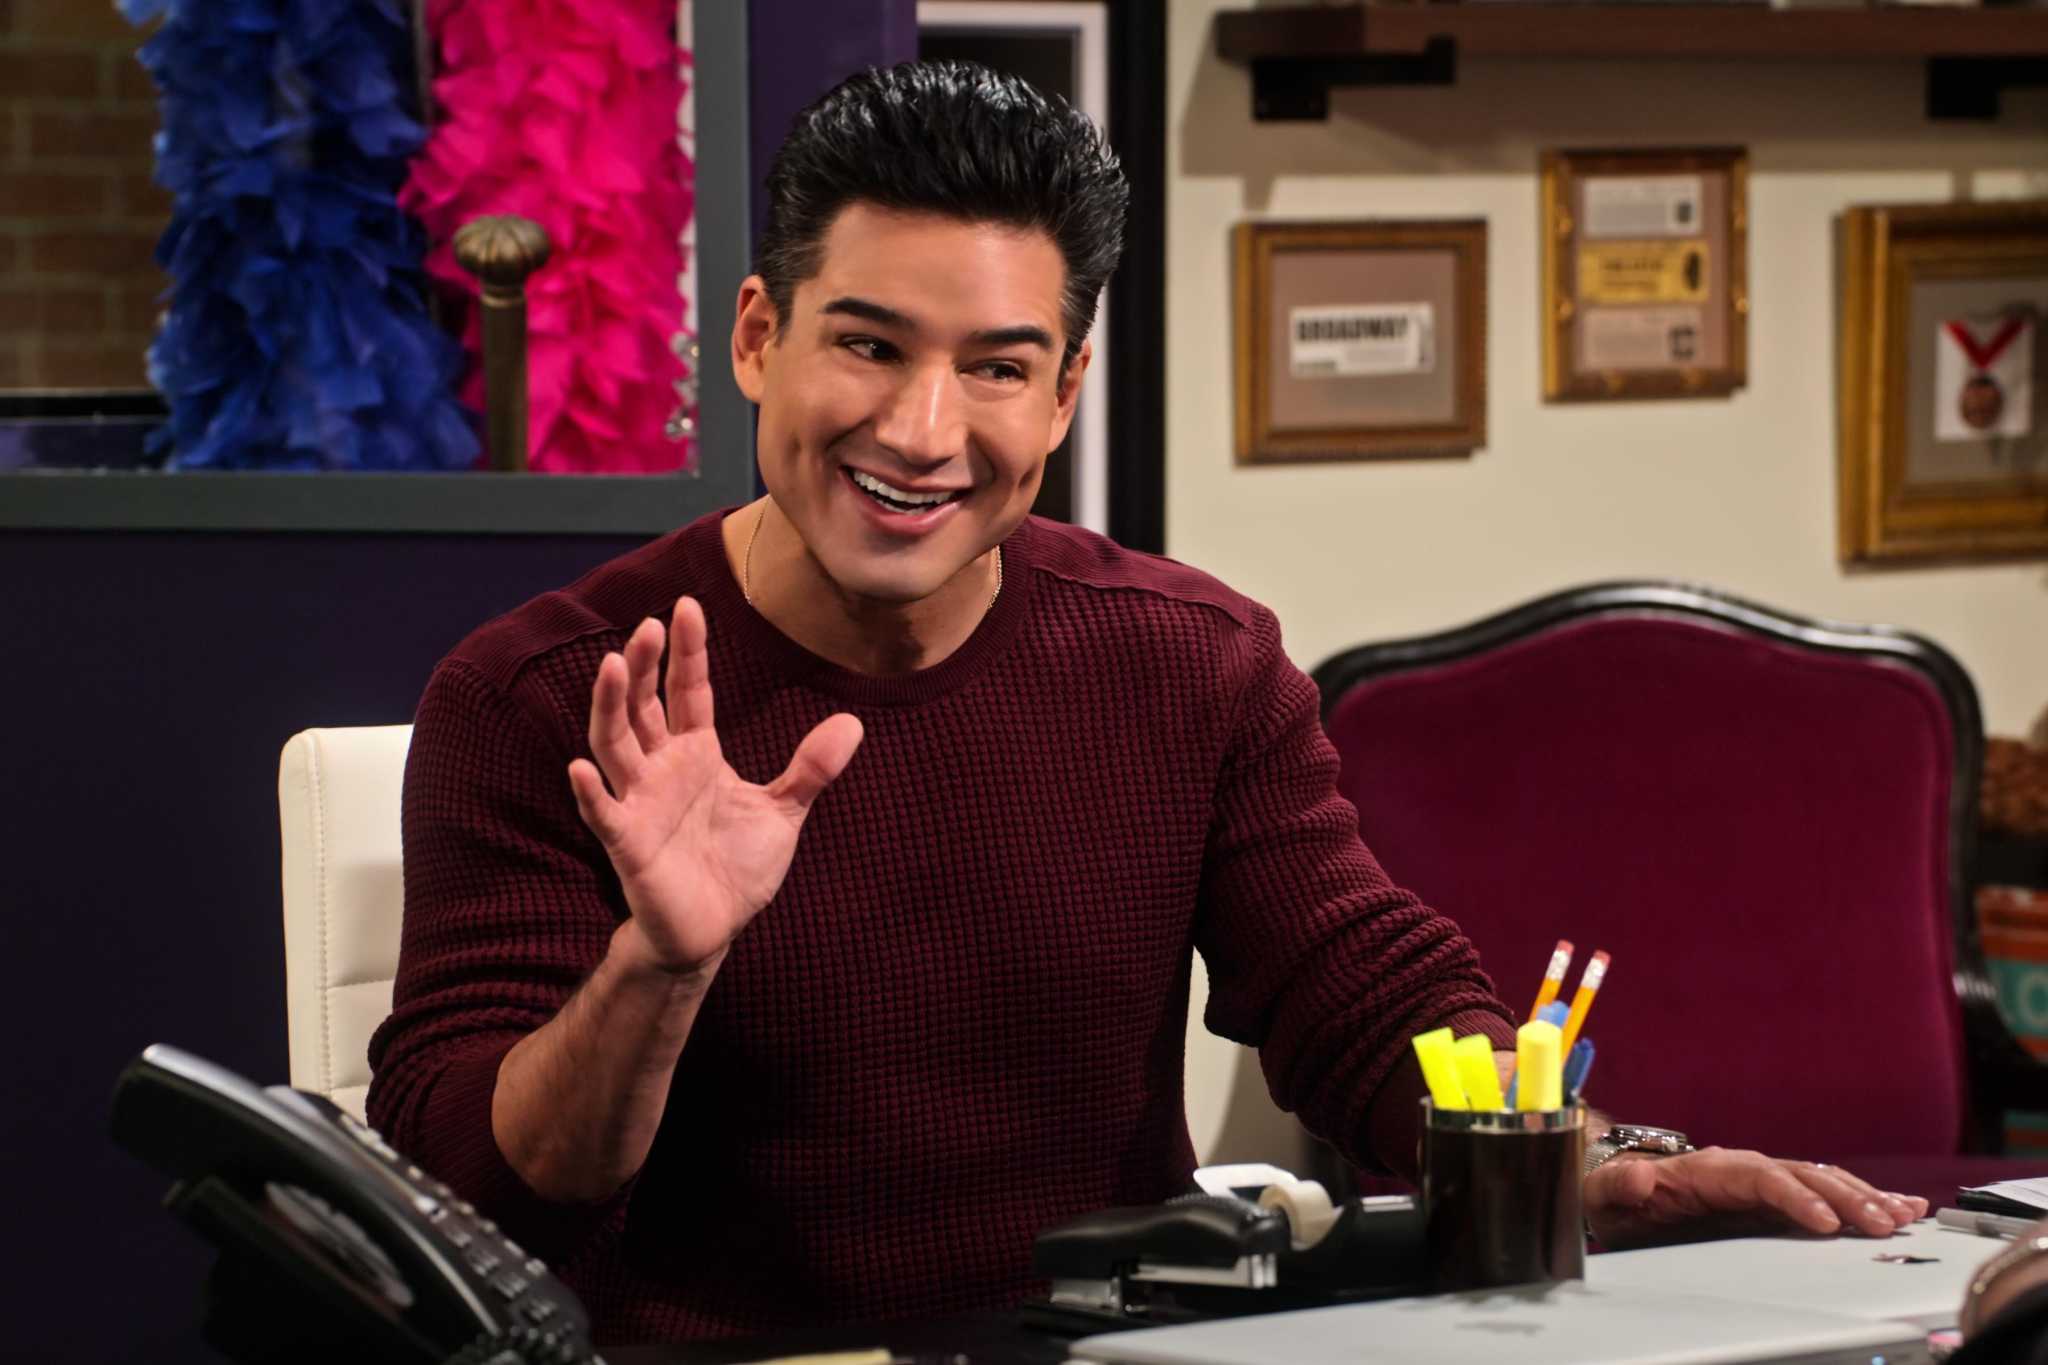 Mario Lopez responds to followers’ shock at code switching